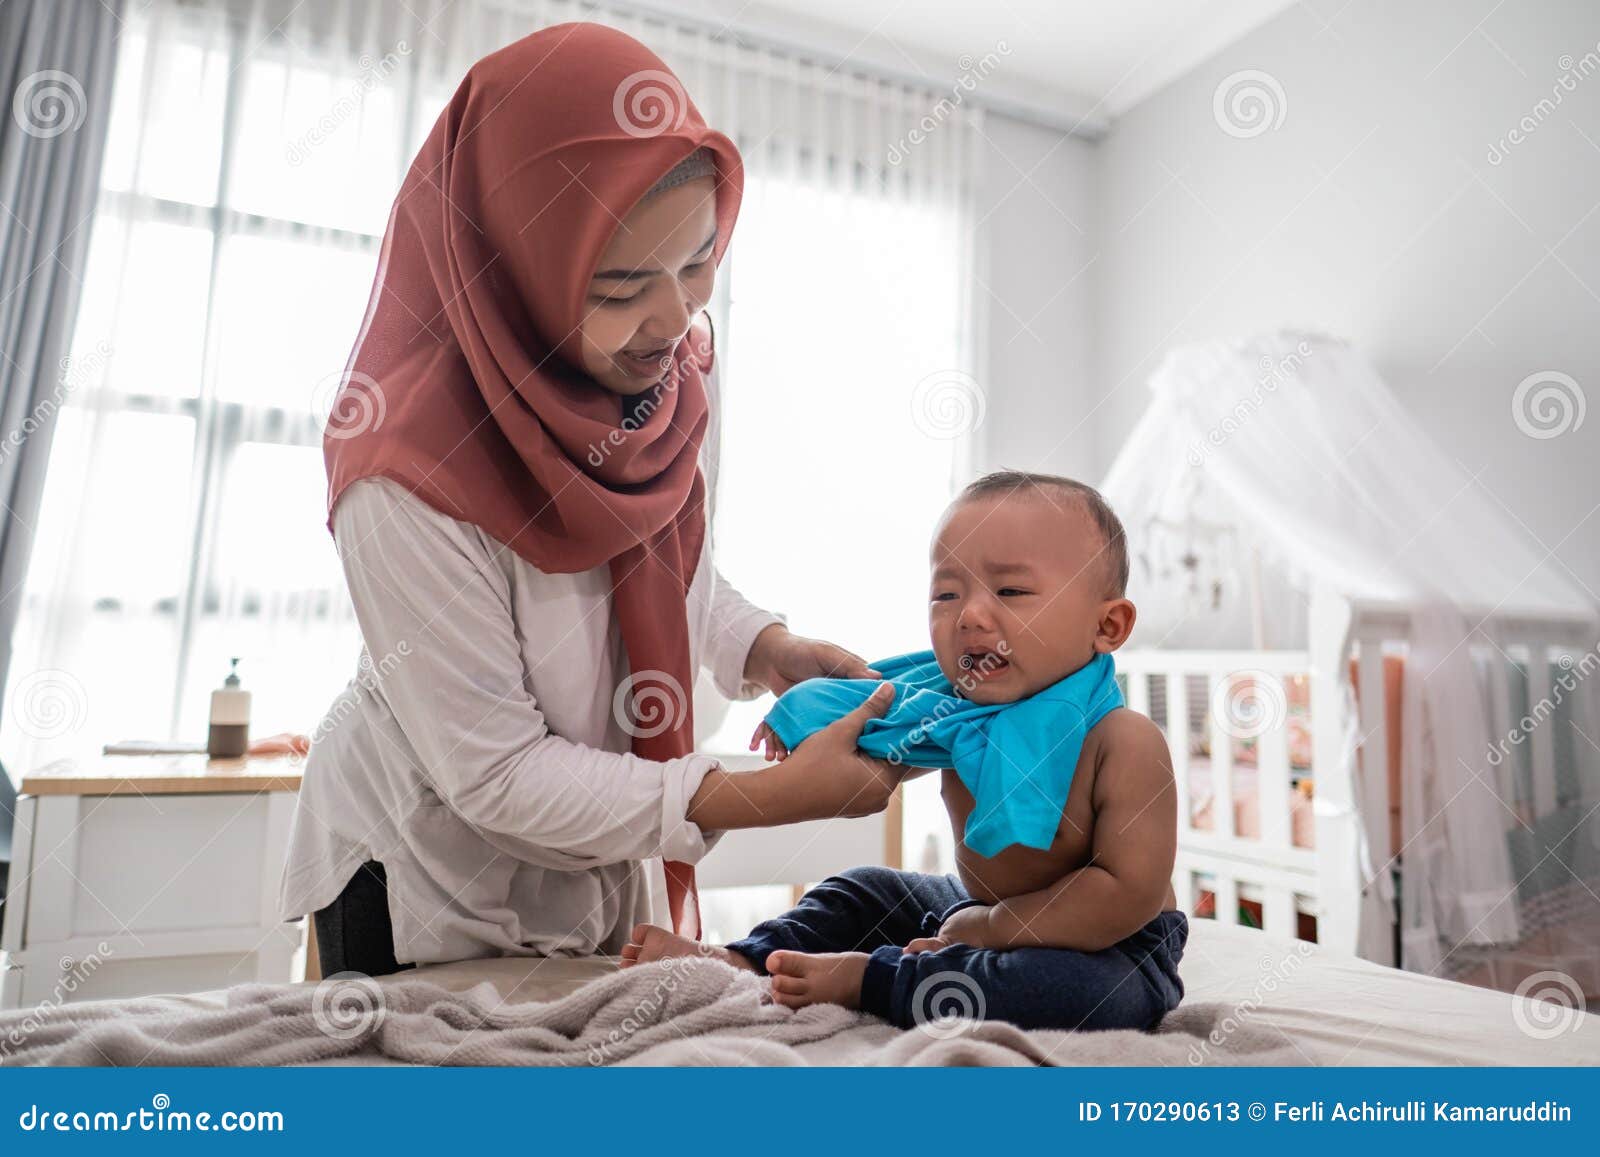 Mustache depth button Baby boy clothes change stock image. Image of pouring - 170290613